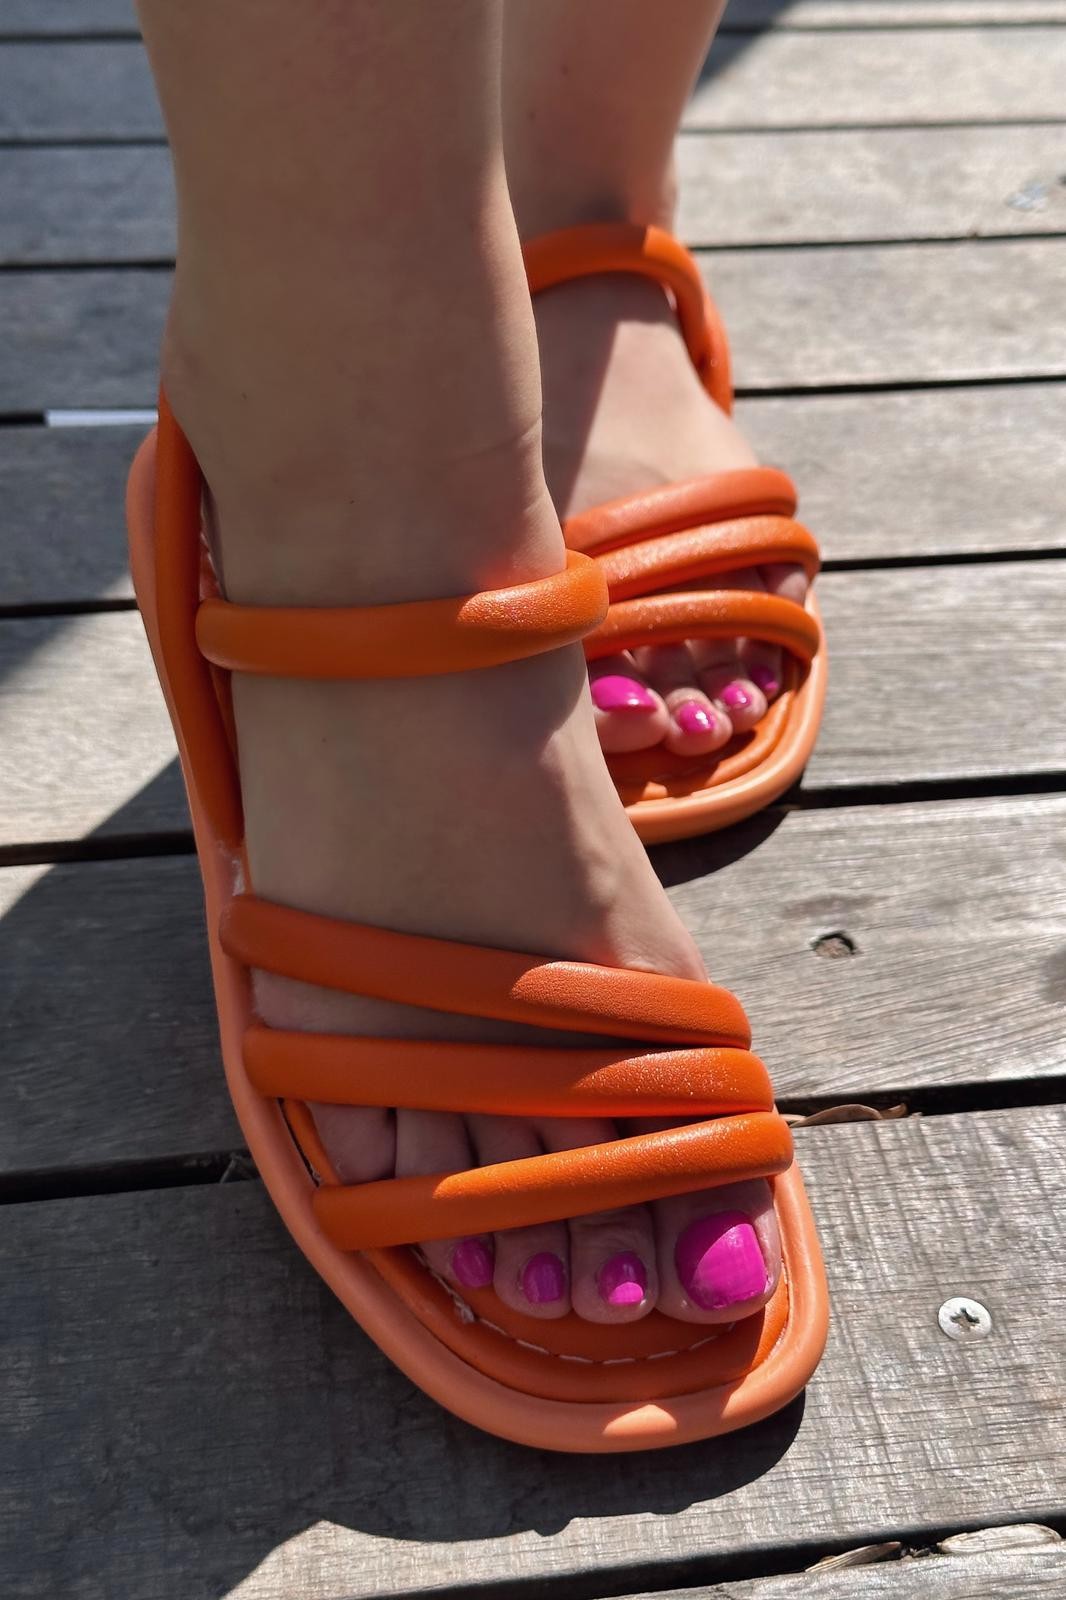 Sandals | Summer | Cute | 2020 trends | Leather | Heels | Flat | Strappy |  High heel | Bridal |shoe… | Slipper shoes women, Leather shoes woman,  Sandals 2020 trends